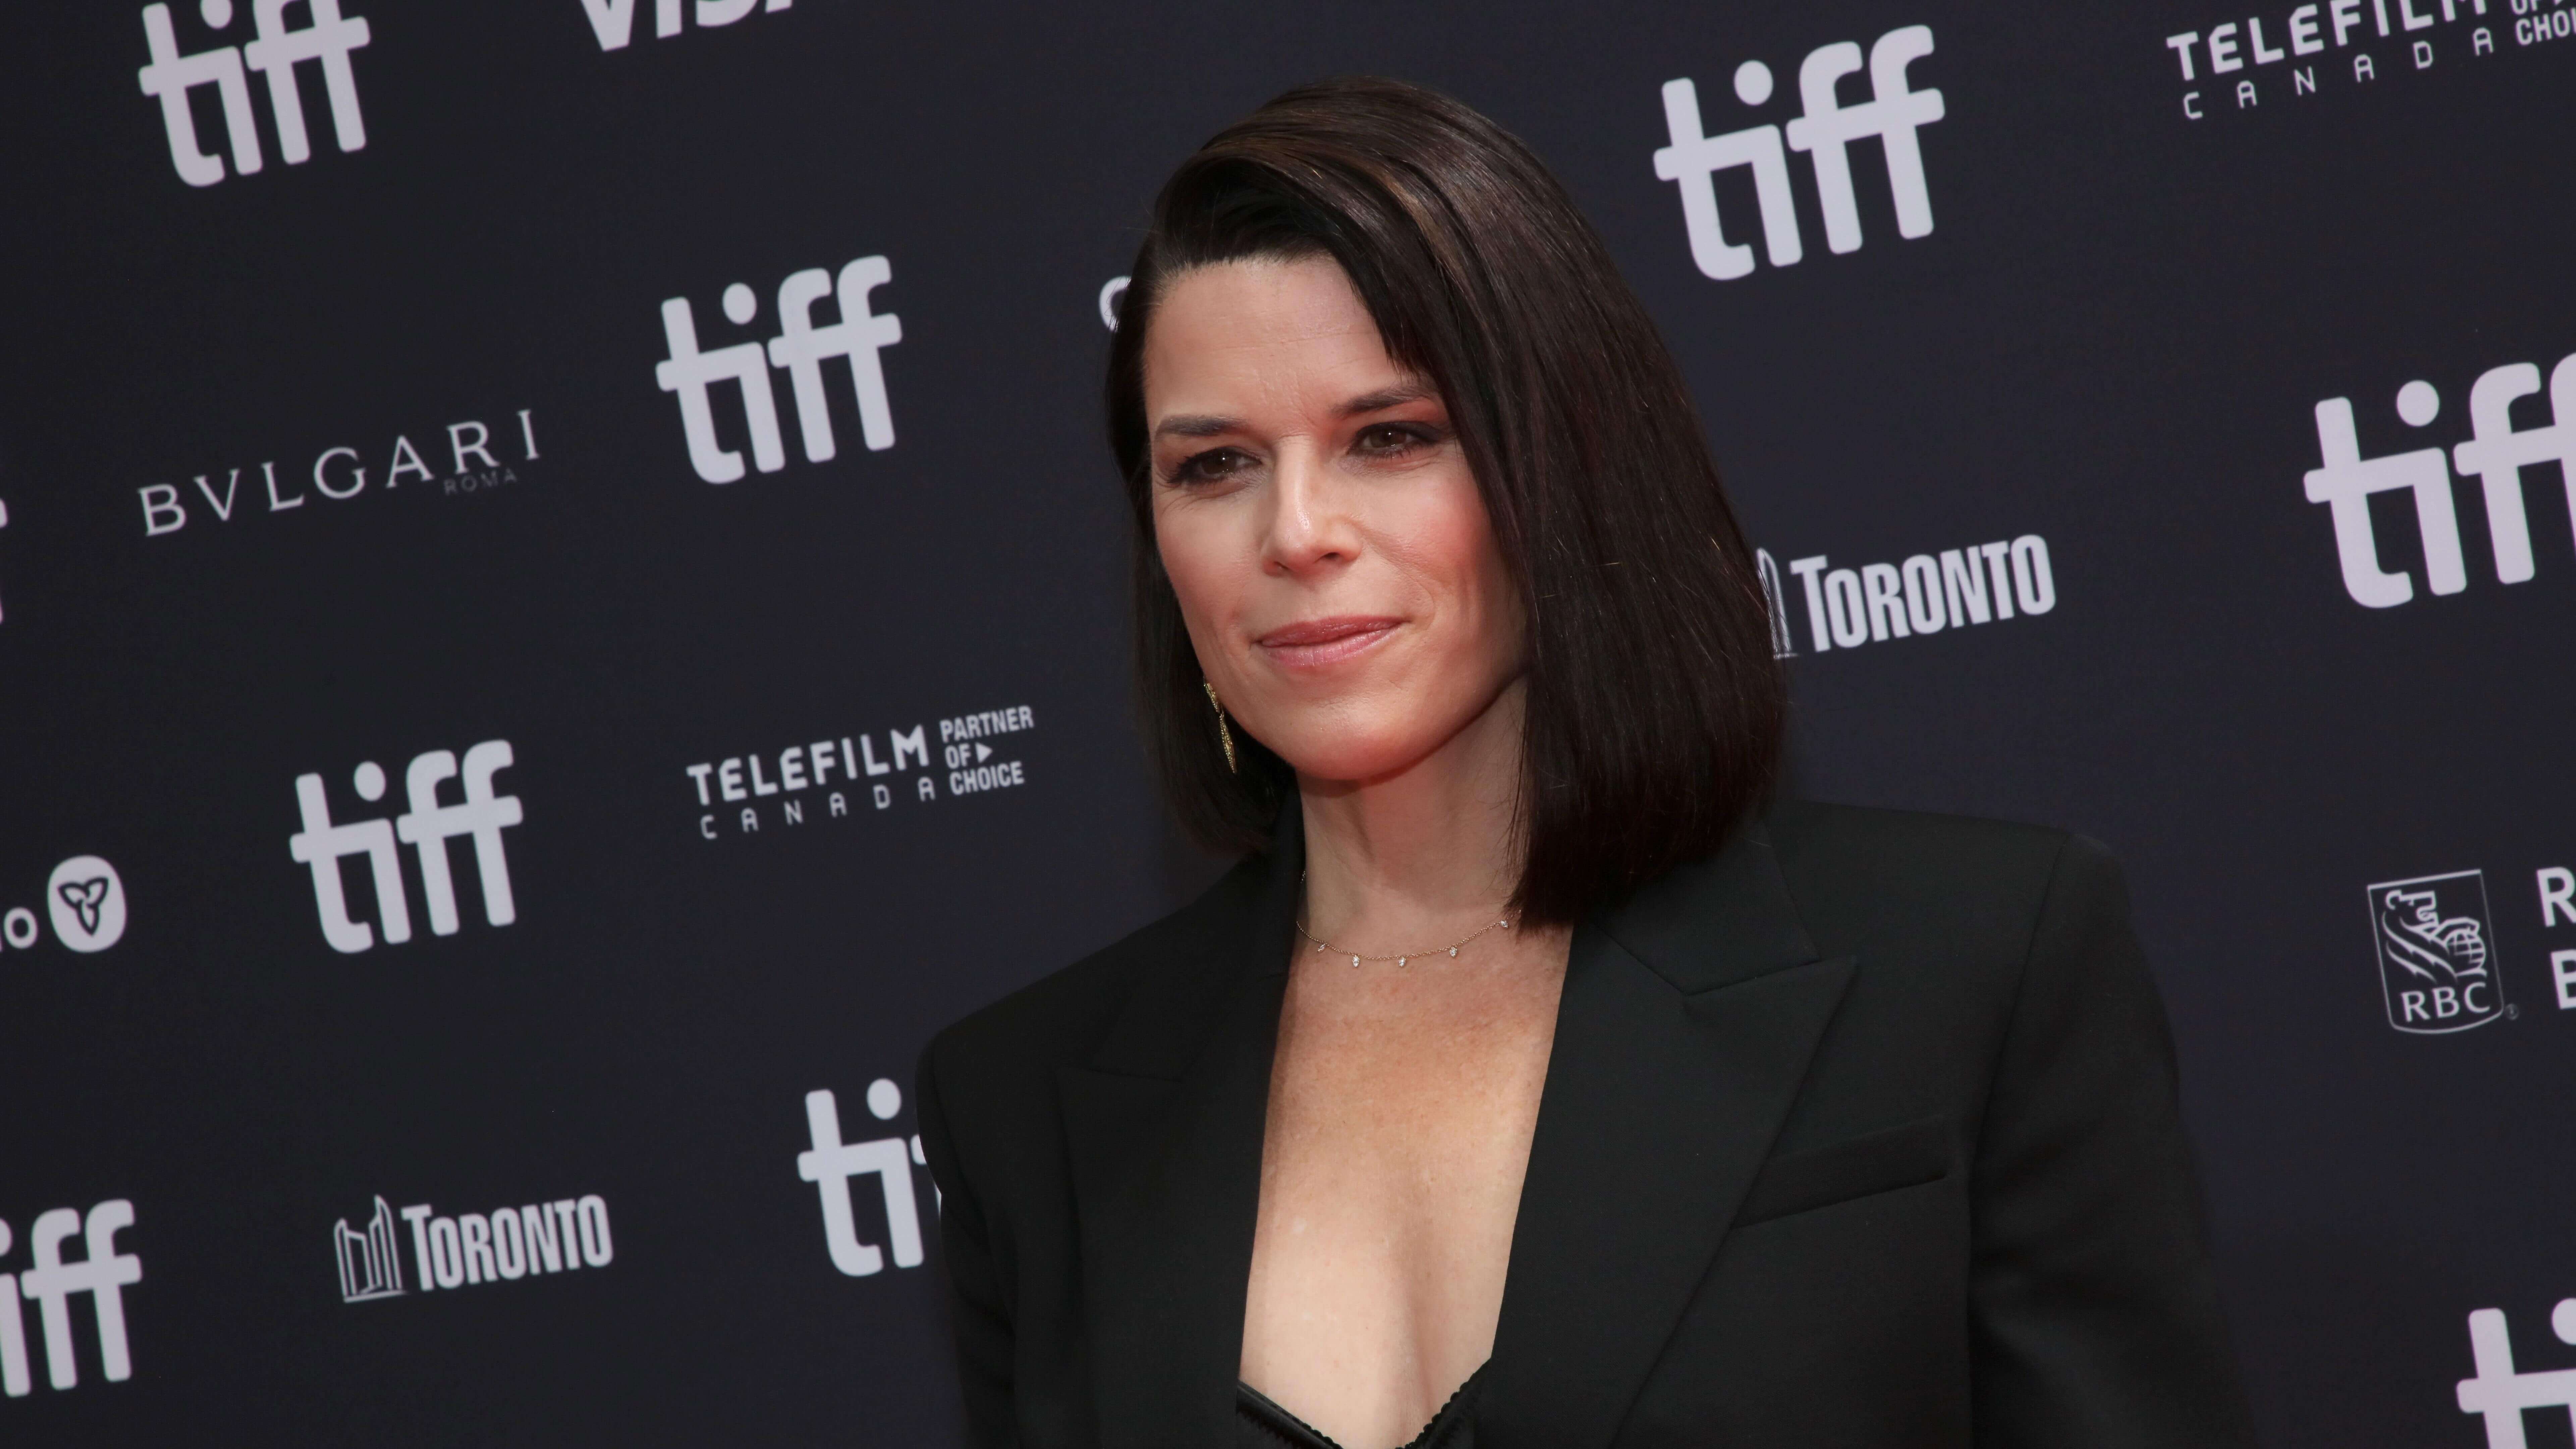 Neve Campbell says she’s open to a “respectful offer” to come save Scream from itself